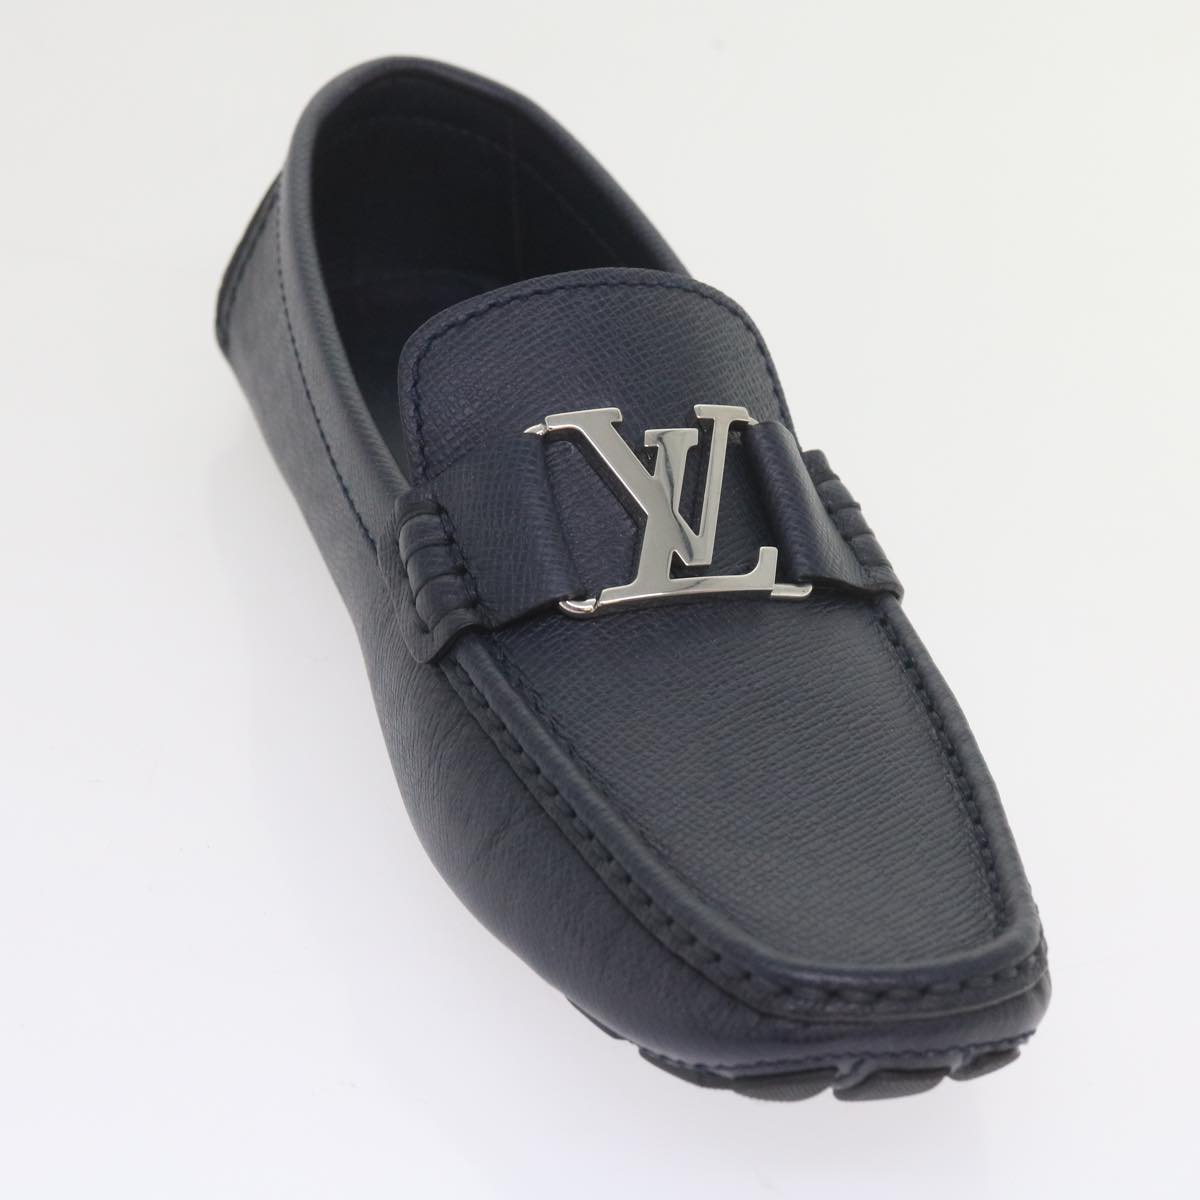 LOUIS VUITTON Monte Carlo line Driving Shoes Leather M8 Navy Auth bs9908